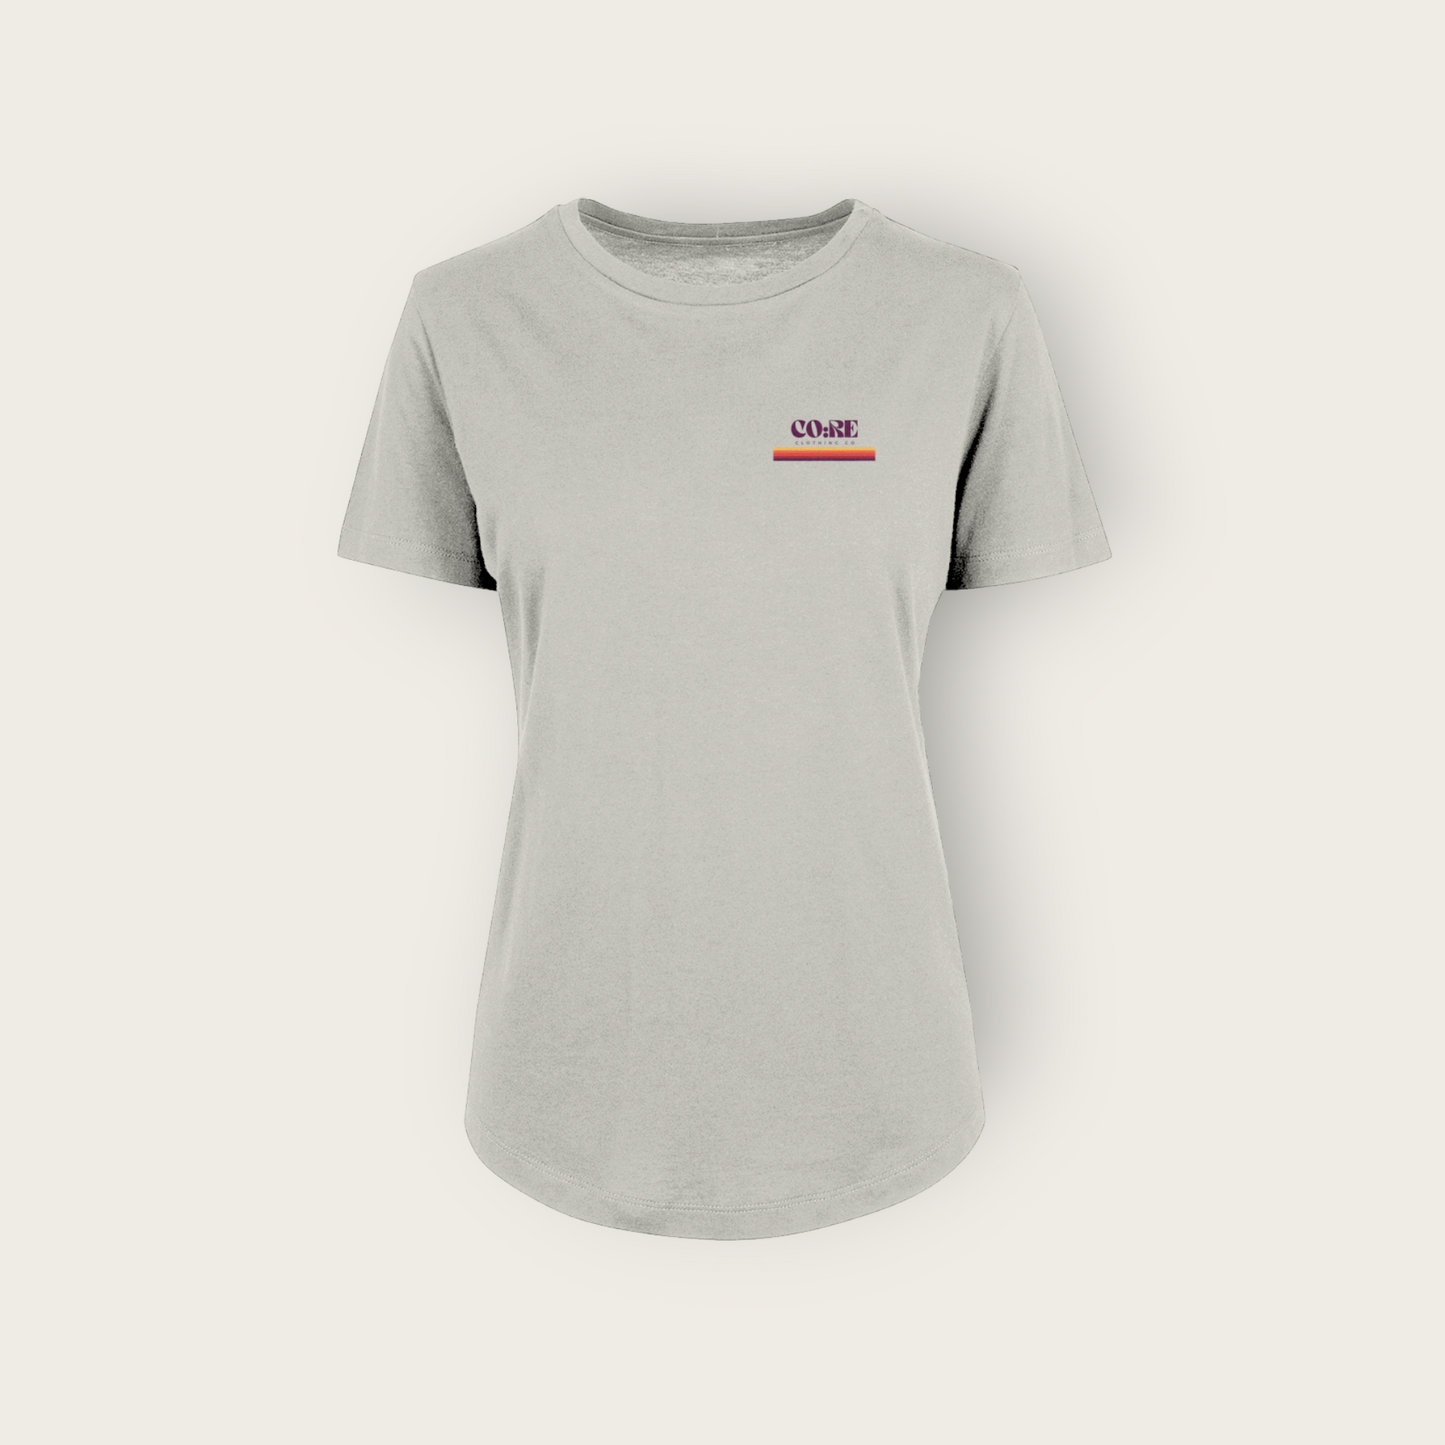 CORE Women's Fit Sunset Lines Tee